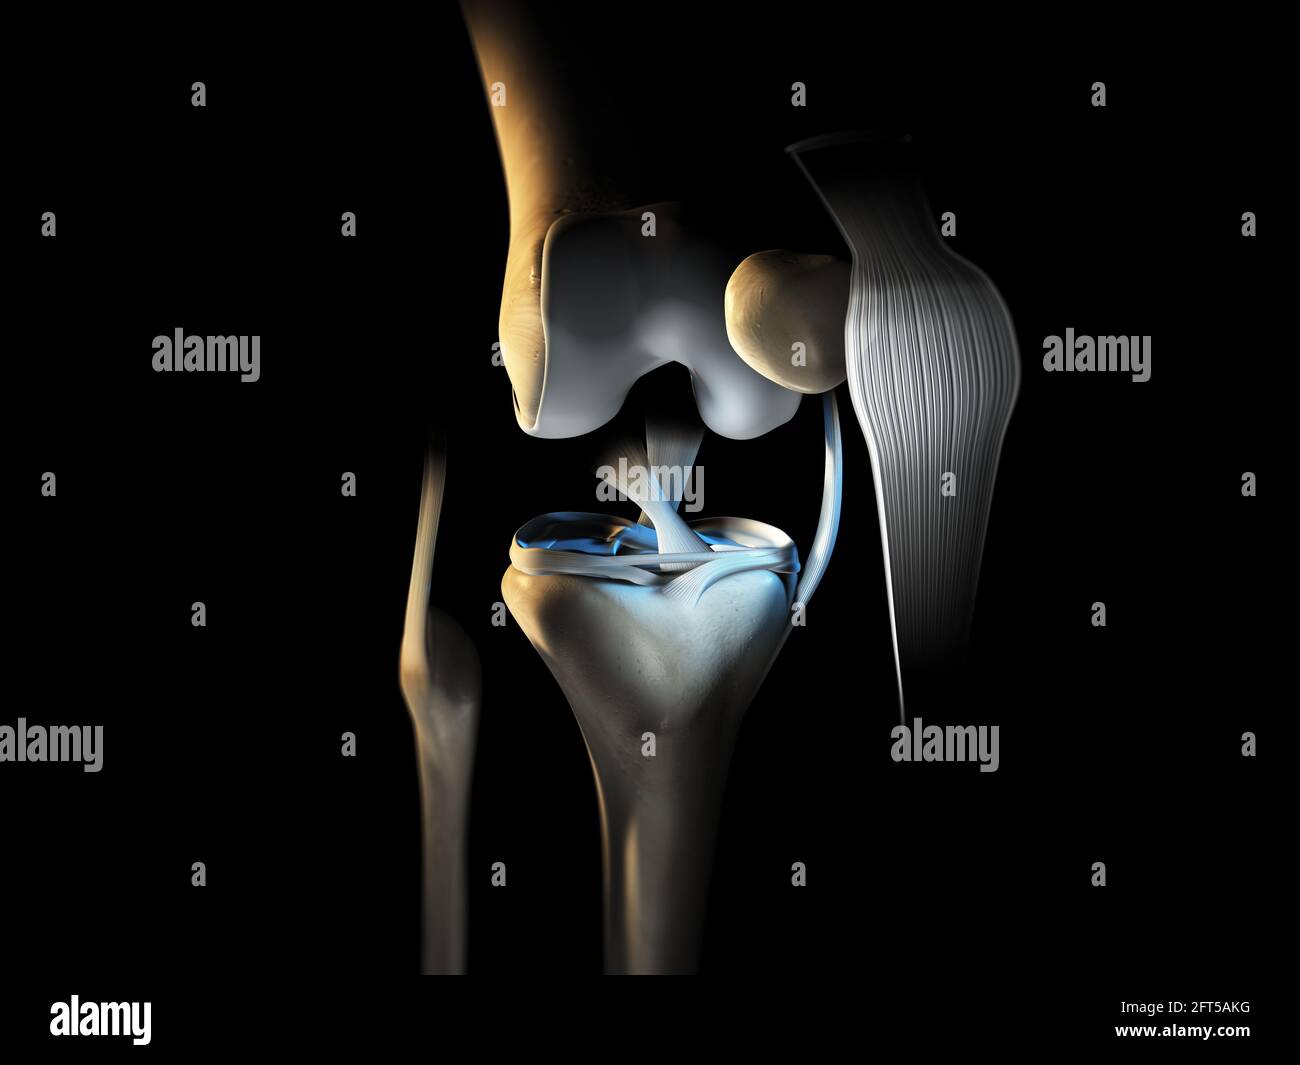 3D illustration showing knee joint with ligaments, meniscus, articular cartilage, fibula and tibia. Stock Photo